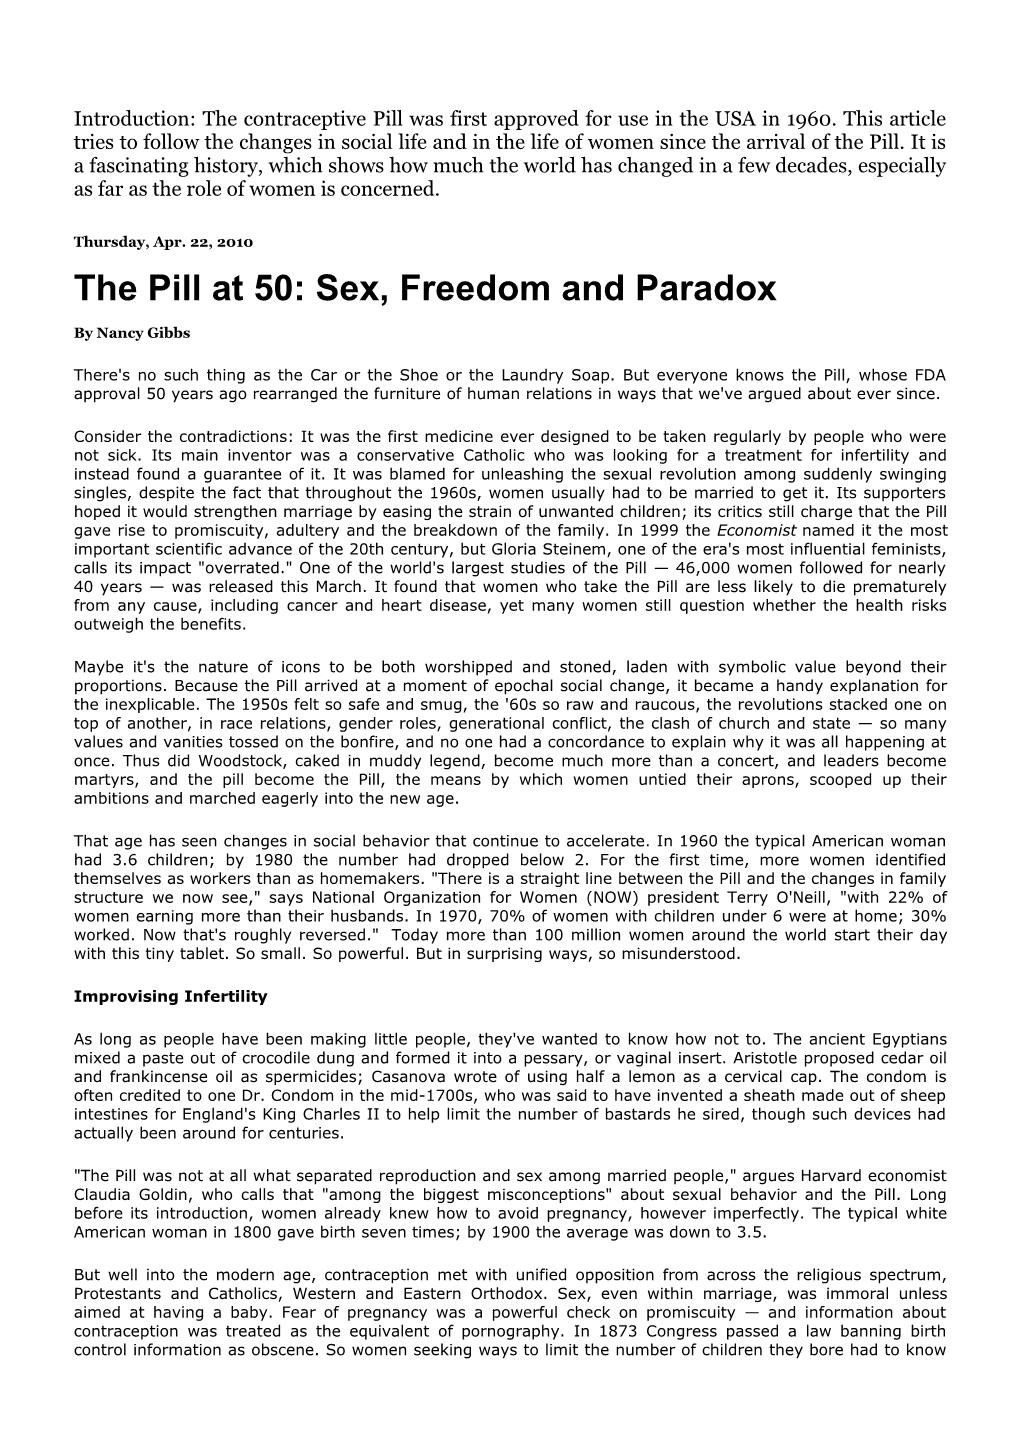 The Pill at 50: Sex, Freedom and Paradox